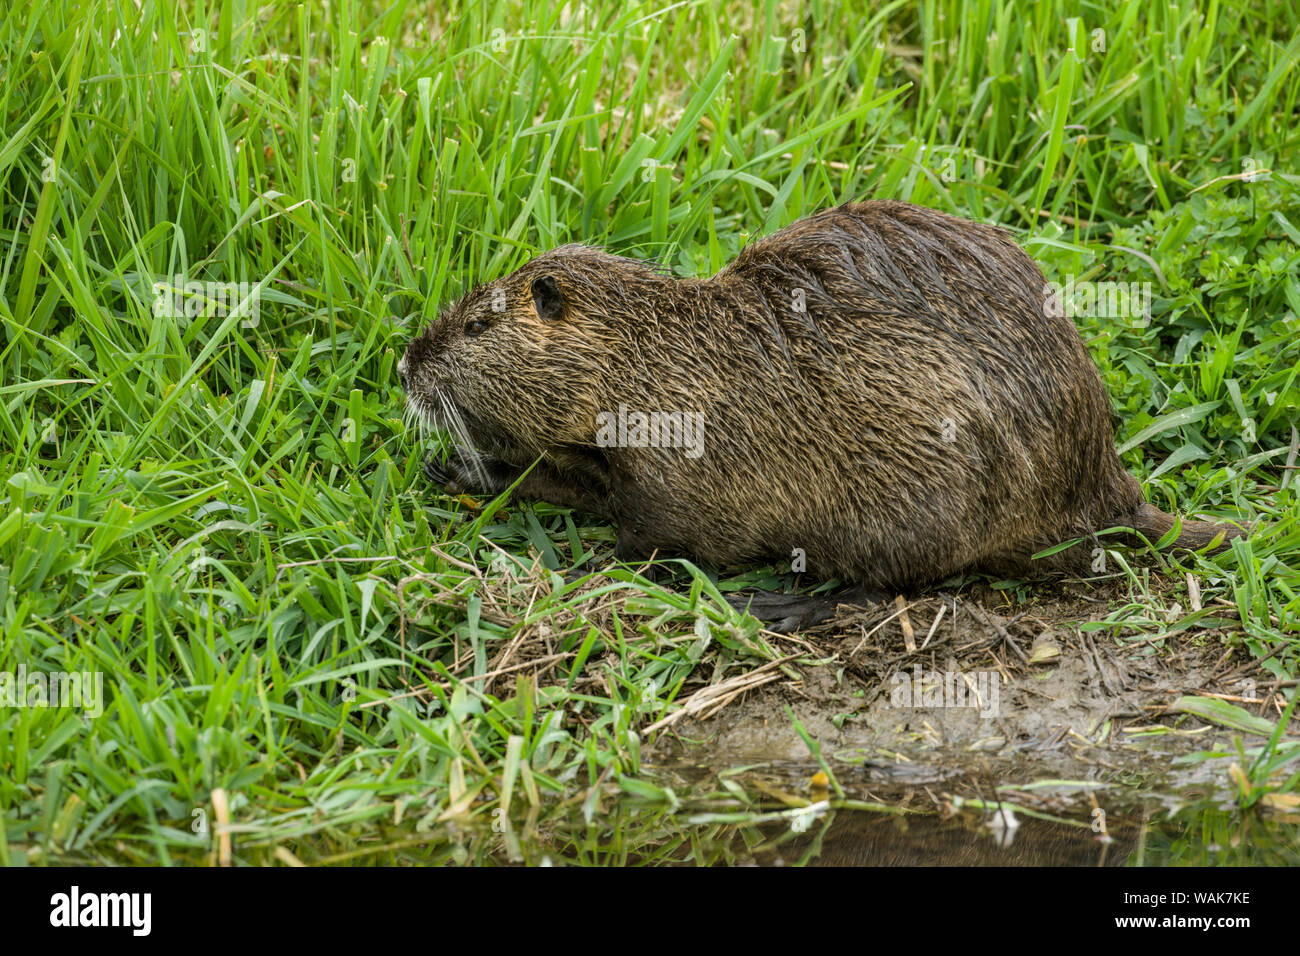 Ridgefield, Washington State, USA. Nutria in Ridgefield National Wildlife Refuge. Coypu, also known as the river rat or nutria, is a large, omnivorous, semi-aquatic rodent. Stock Photo